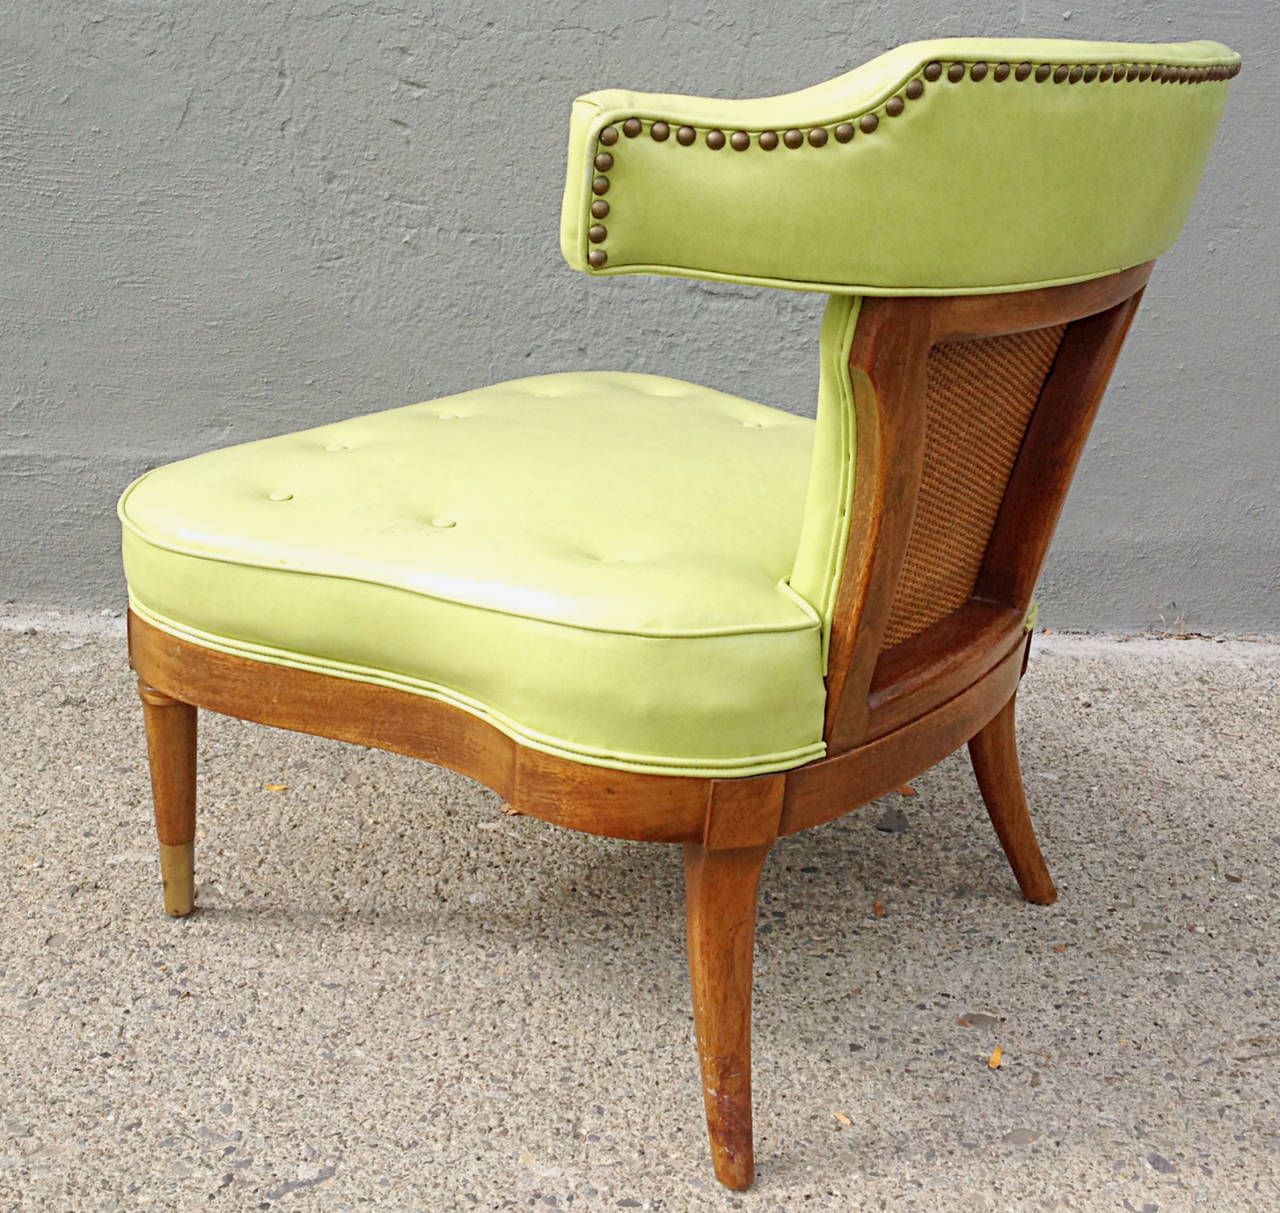 Mid-20th Century Stylized Slipper Chair By Mastercraft